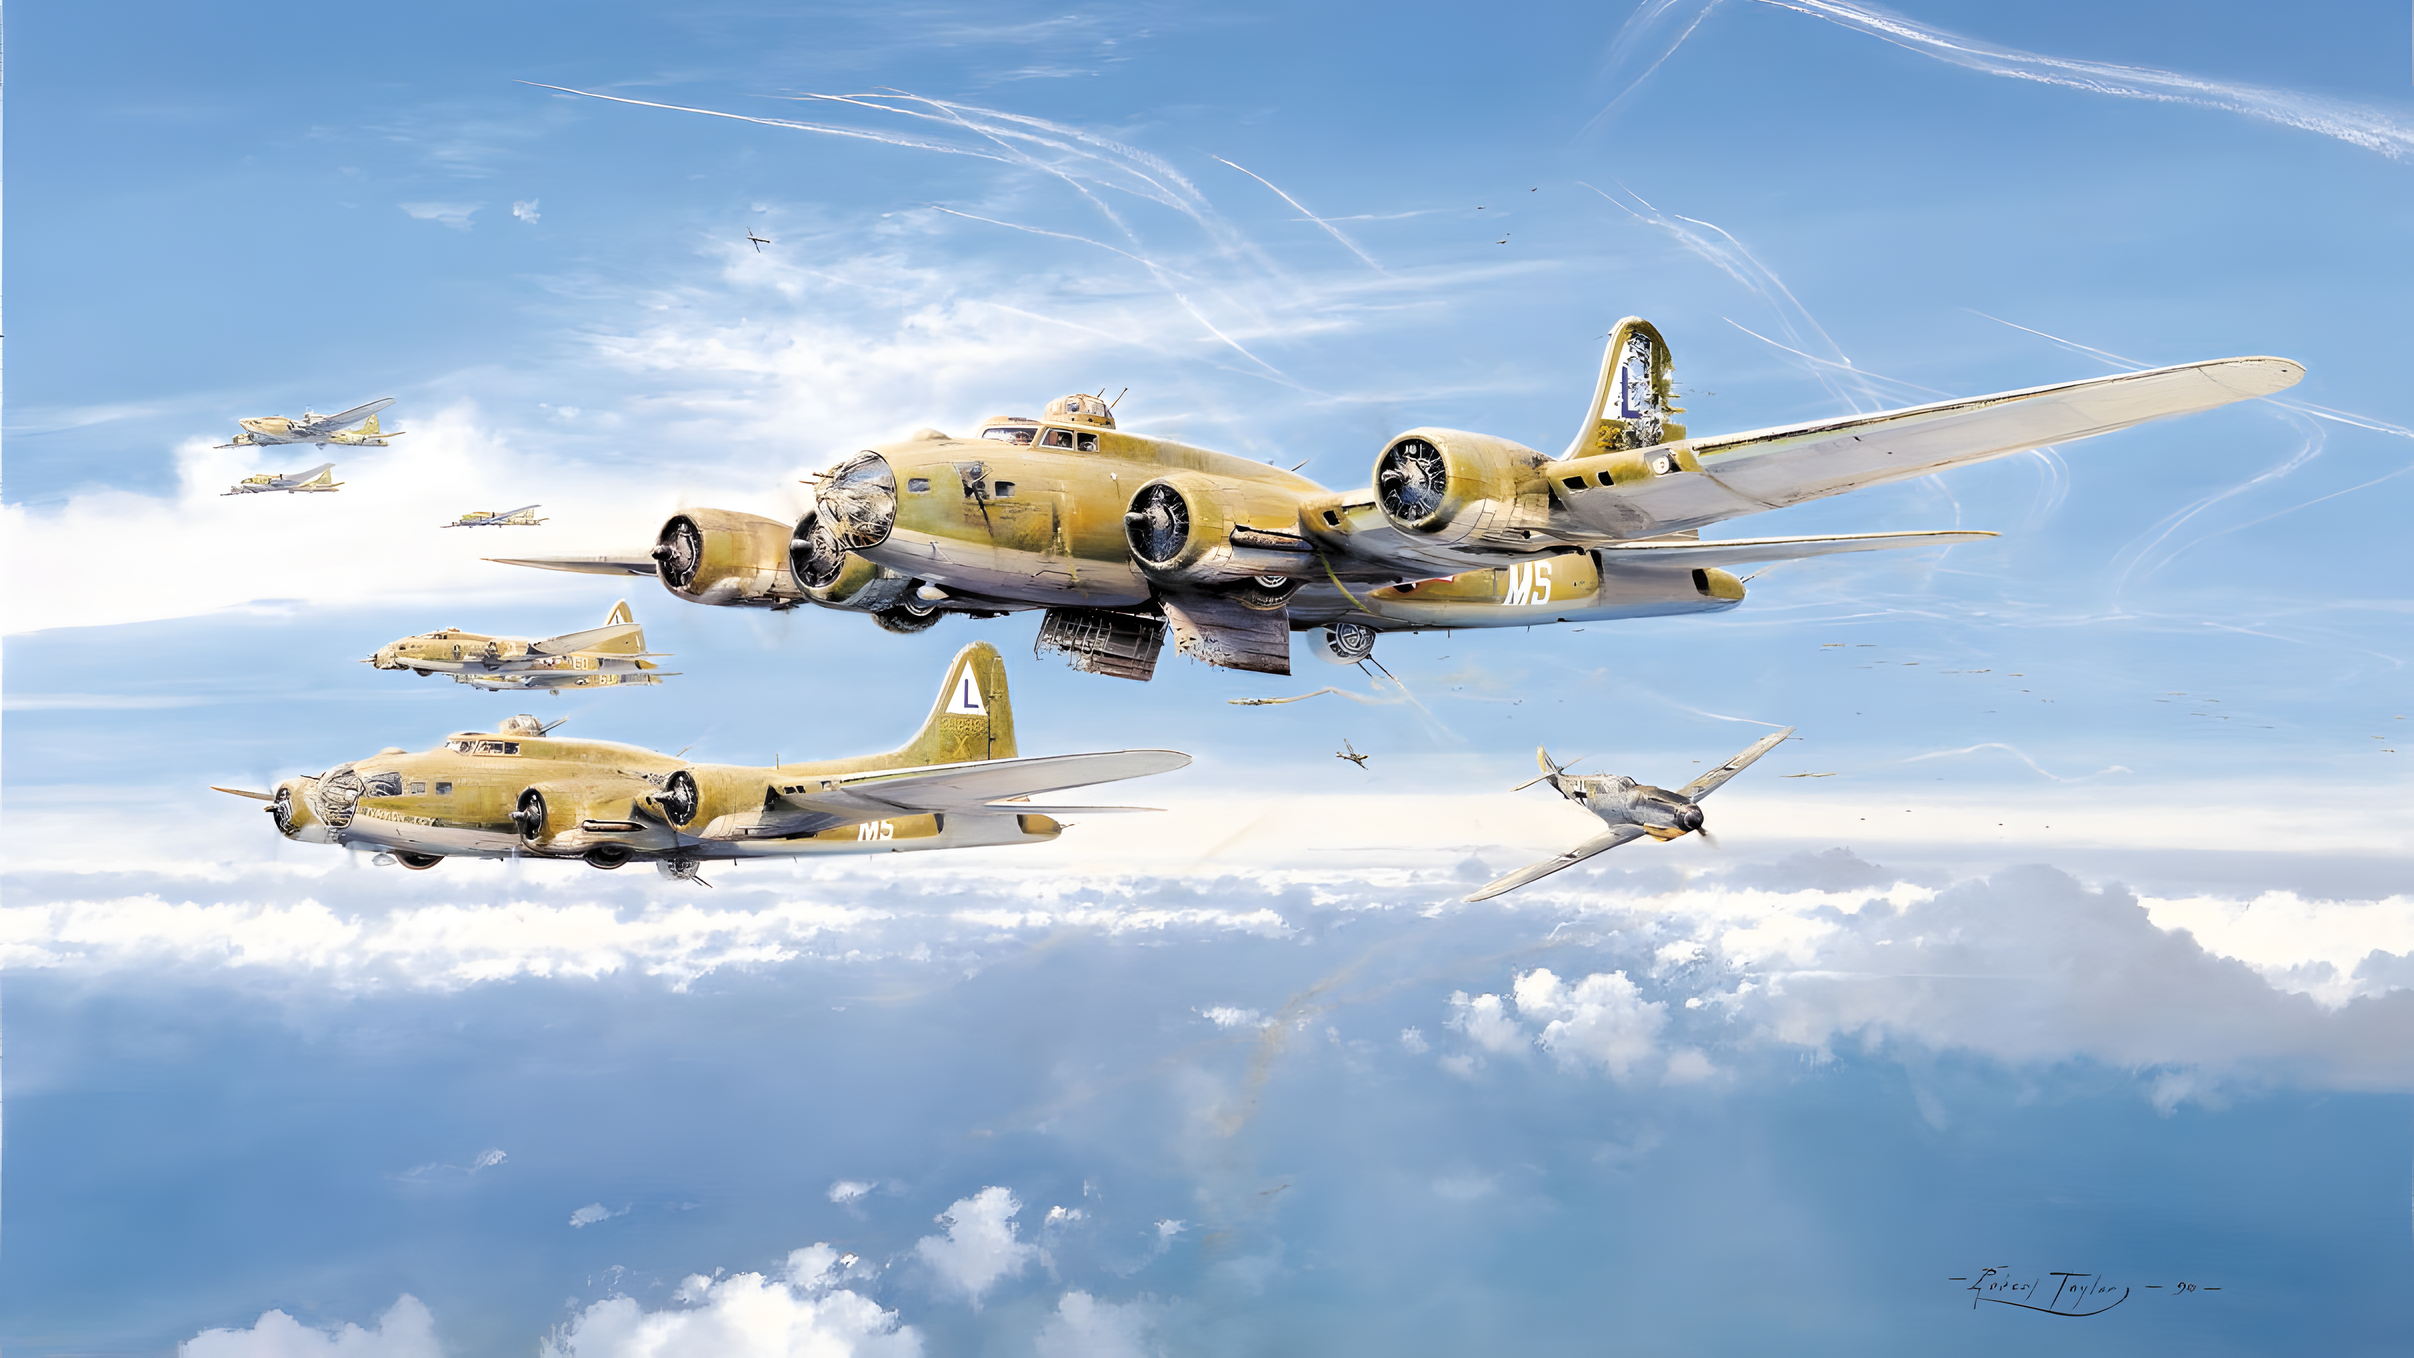 In Robert Taylor’s painting, Return from Schweinfurt, P-47 Thunderbolt fighters of the 56th Fighter Group head for home, low on fuel and ammunition, while B-17 bombers fend off late attacks by German Me-109 fighters.